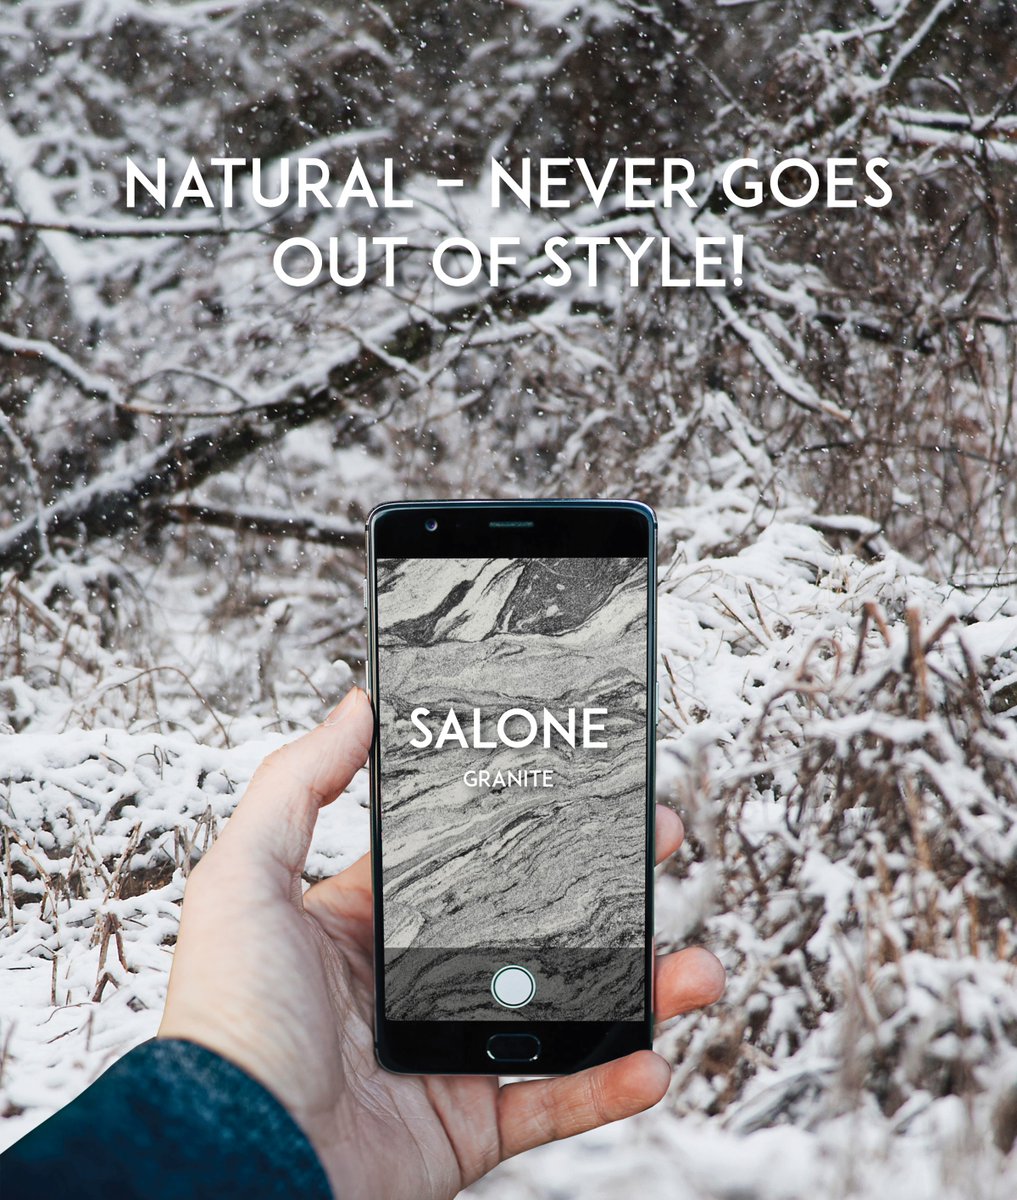 That's right! 
For some, natural stone IS the style.
.
#whitegranite #howyouhome #naturalstone #showmeyourstyle #interiordesign #granite #bringnatureinside #stainresistant #natureisbeautiful